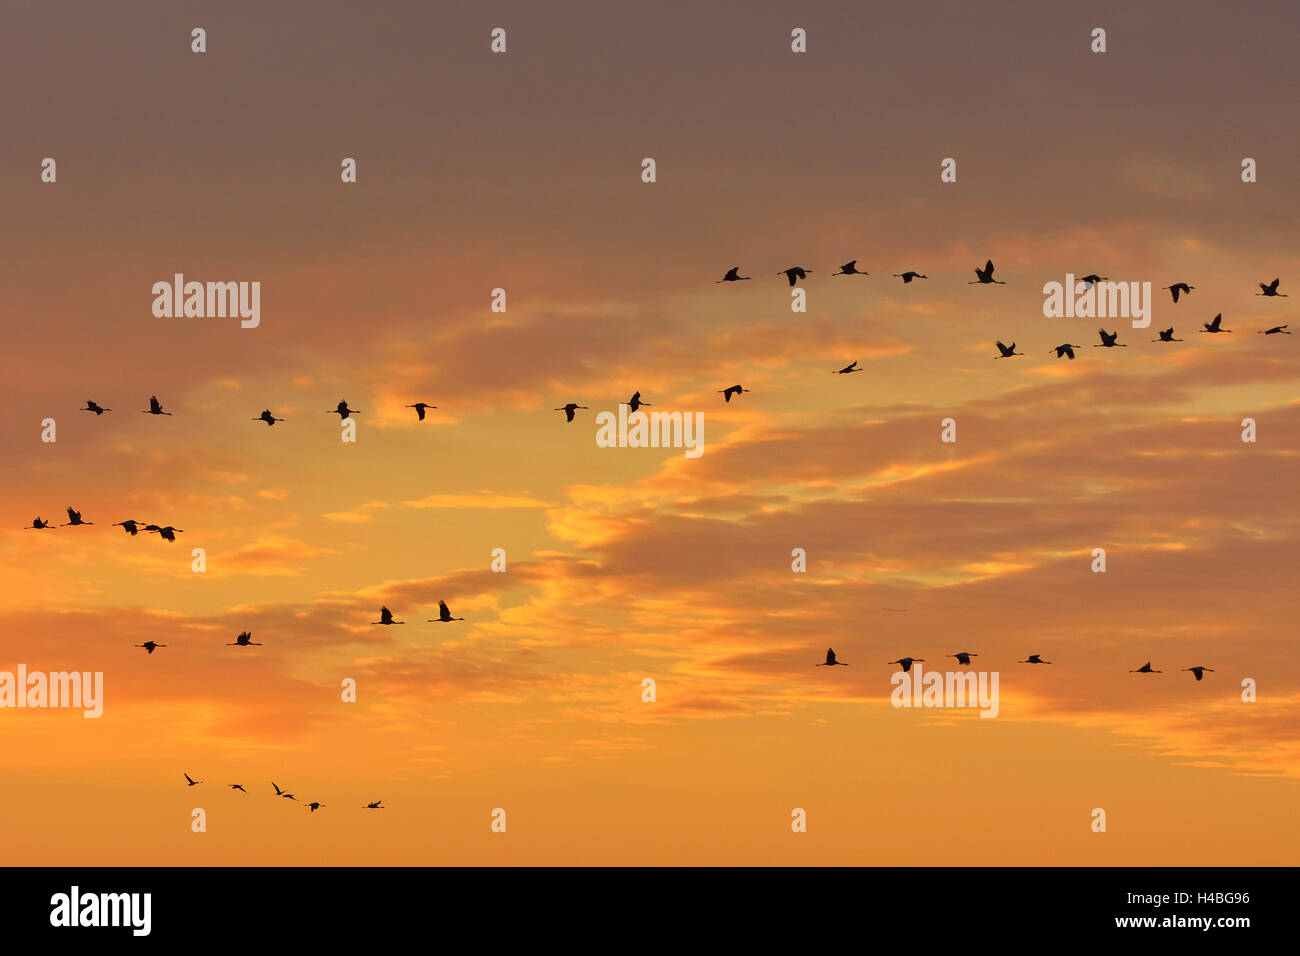 Common Cranes, Grus grus, in Formation Flight, at Sunrise, Zingst, Barther Bodden, Darss, Fischland-Darss-Zingst, Western Pomerania, Germany, Europe Stock Photo